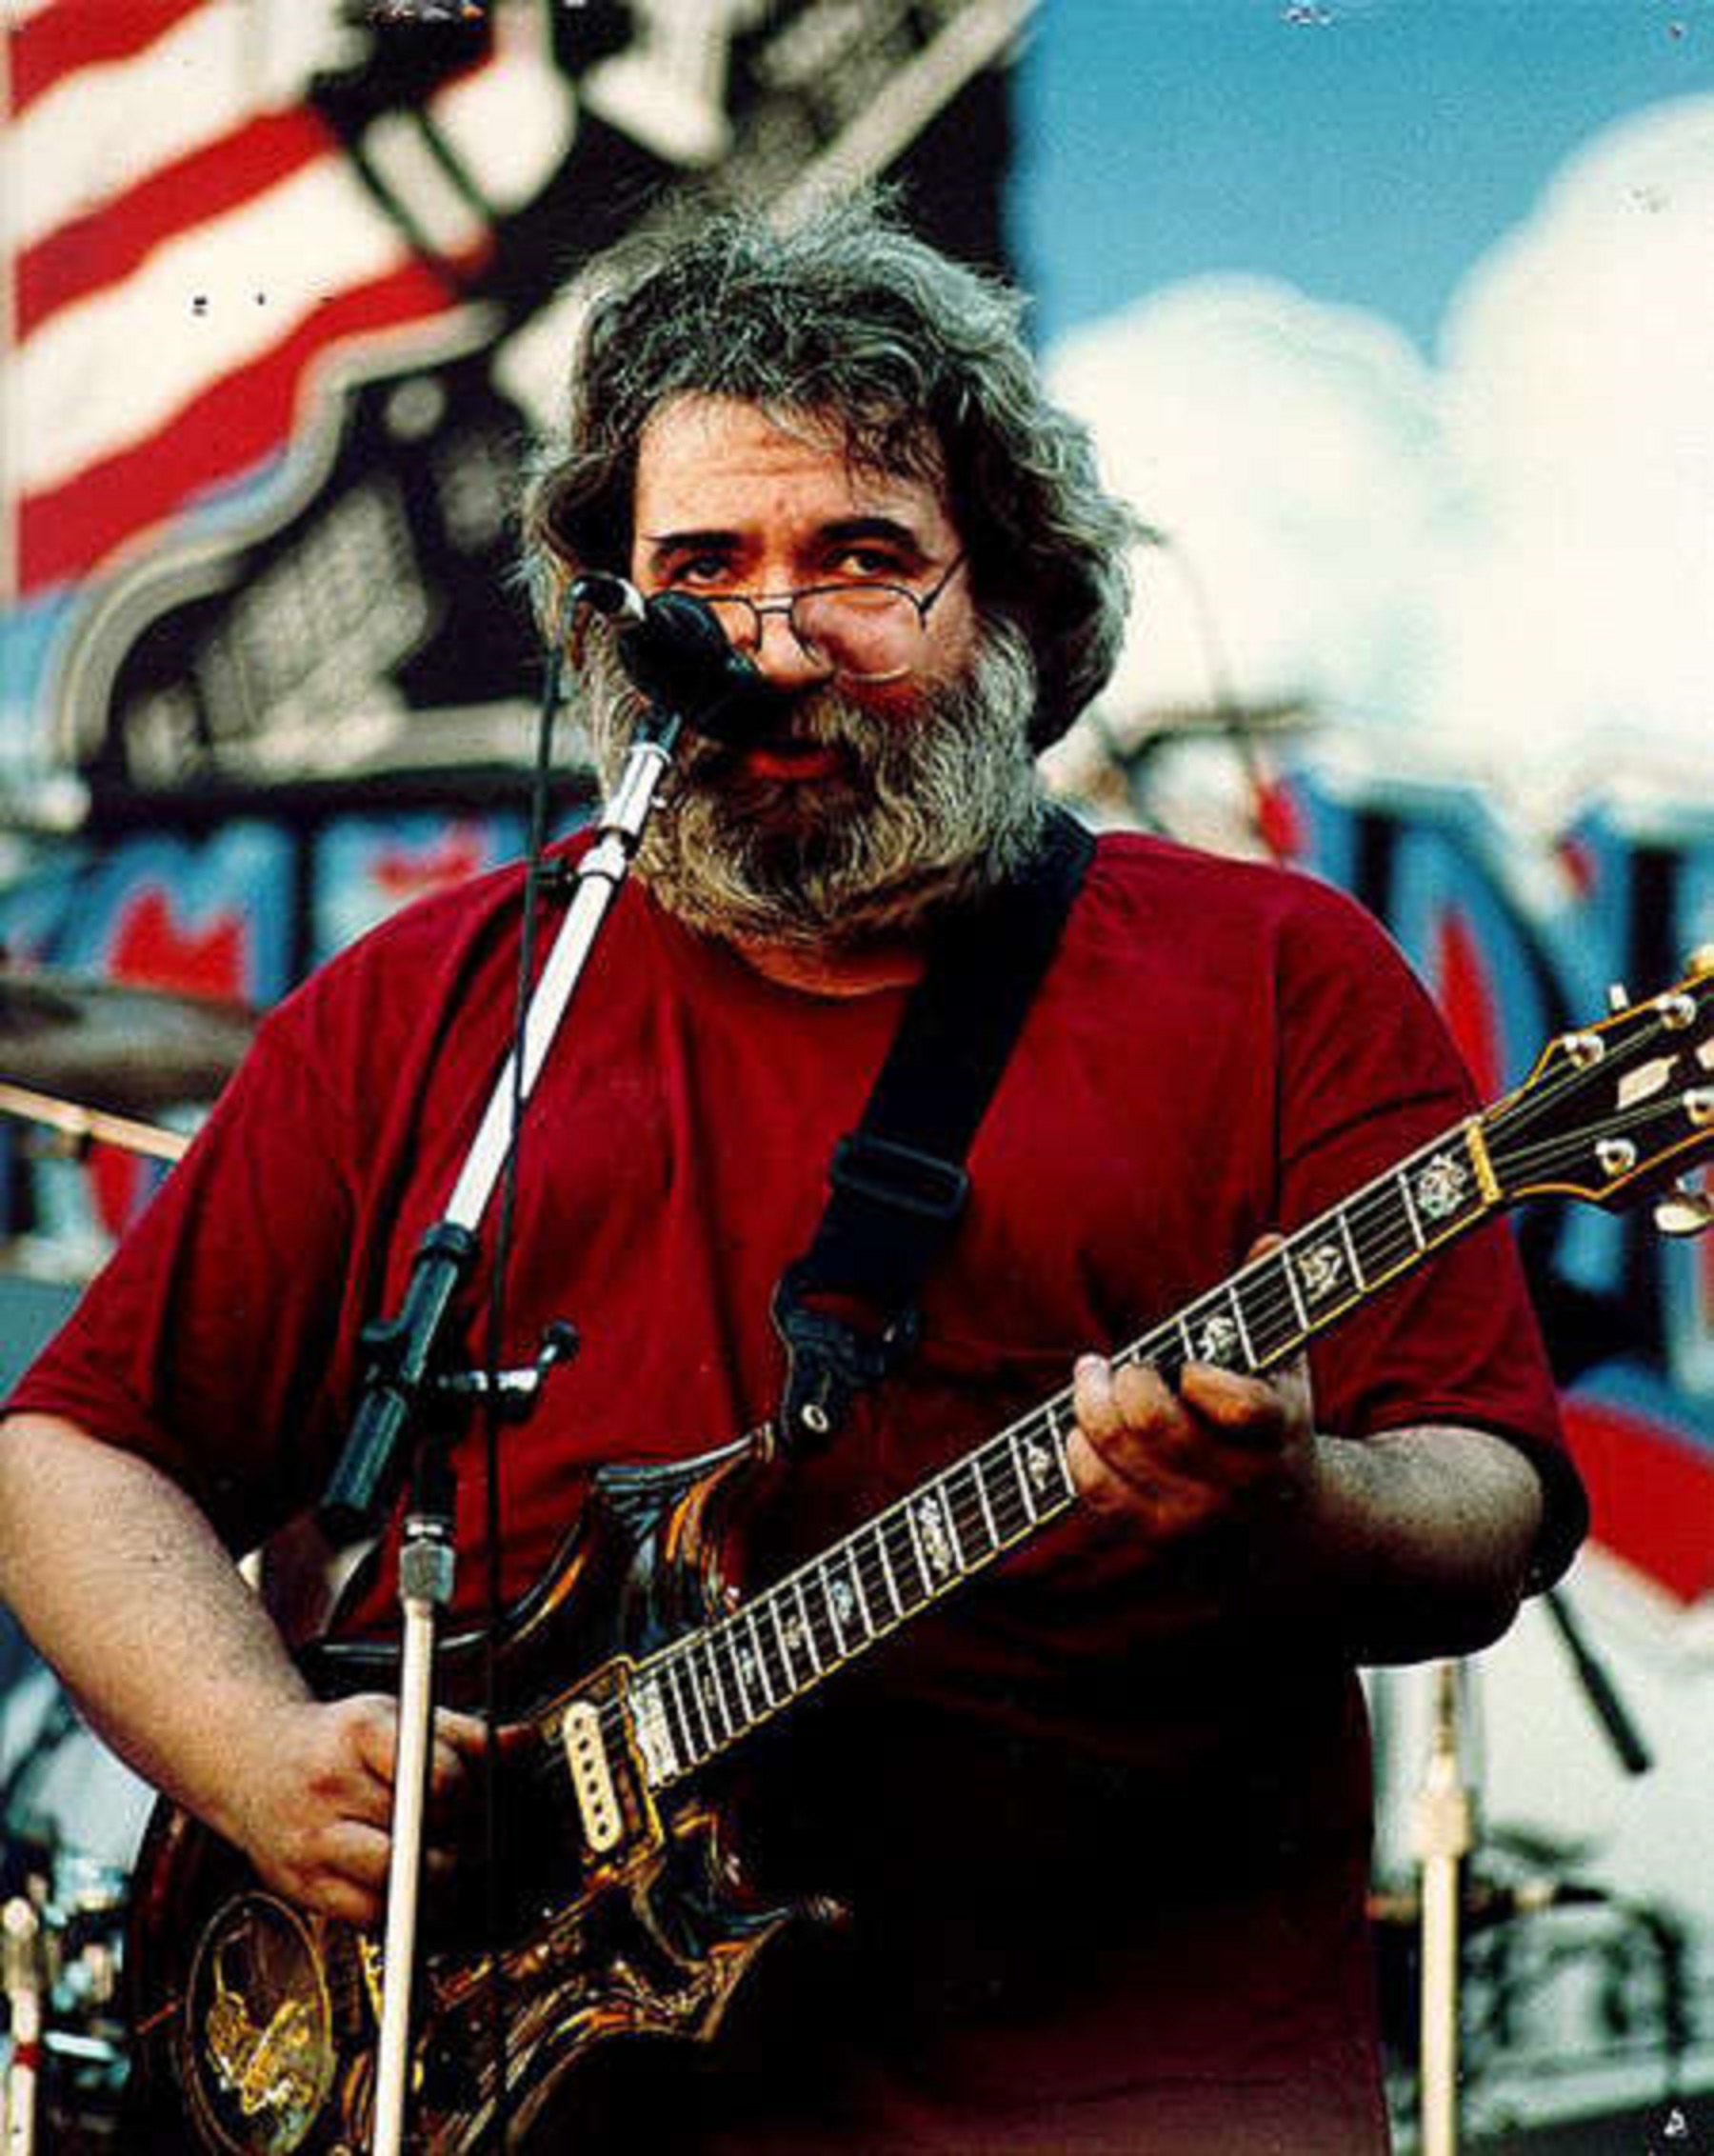 Thoughts on American Music & Jerry Garcia